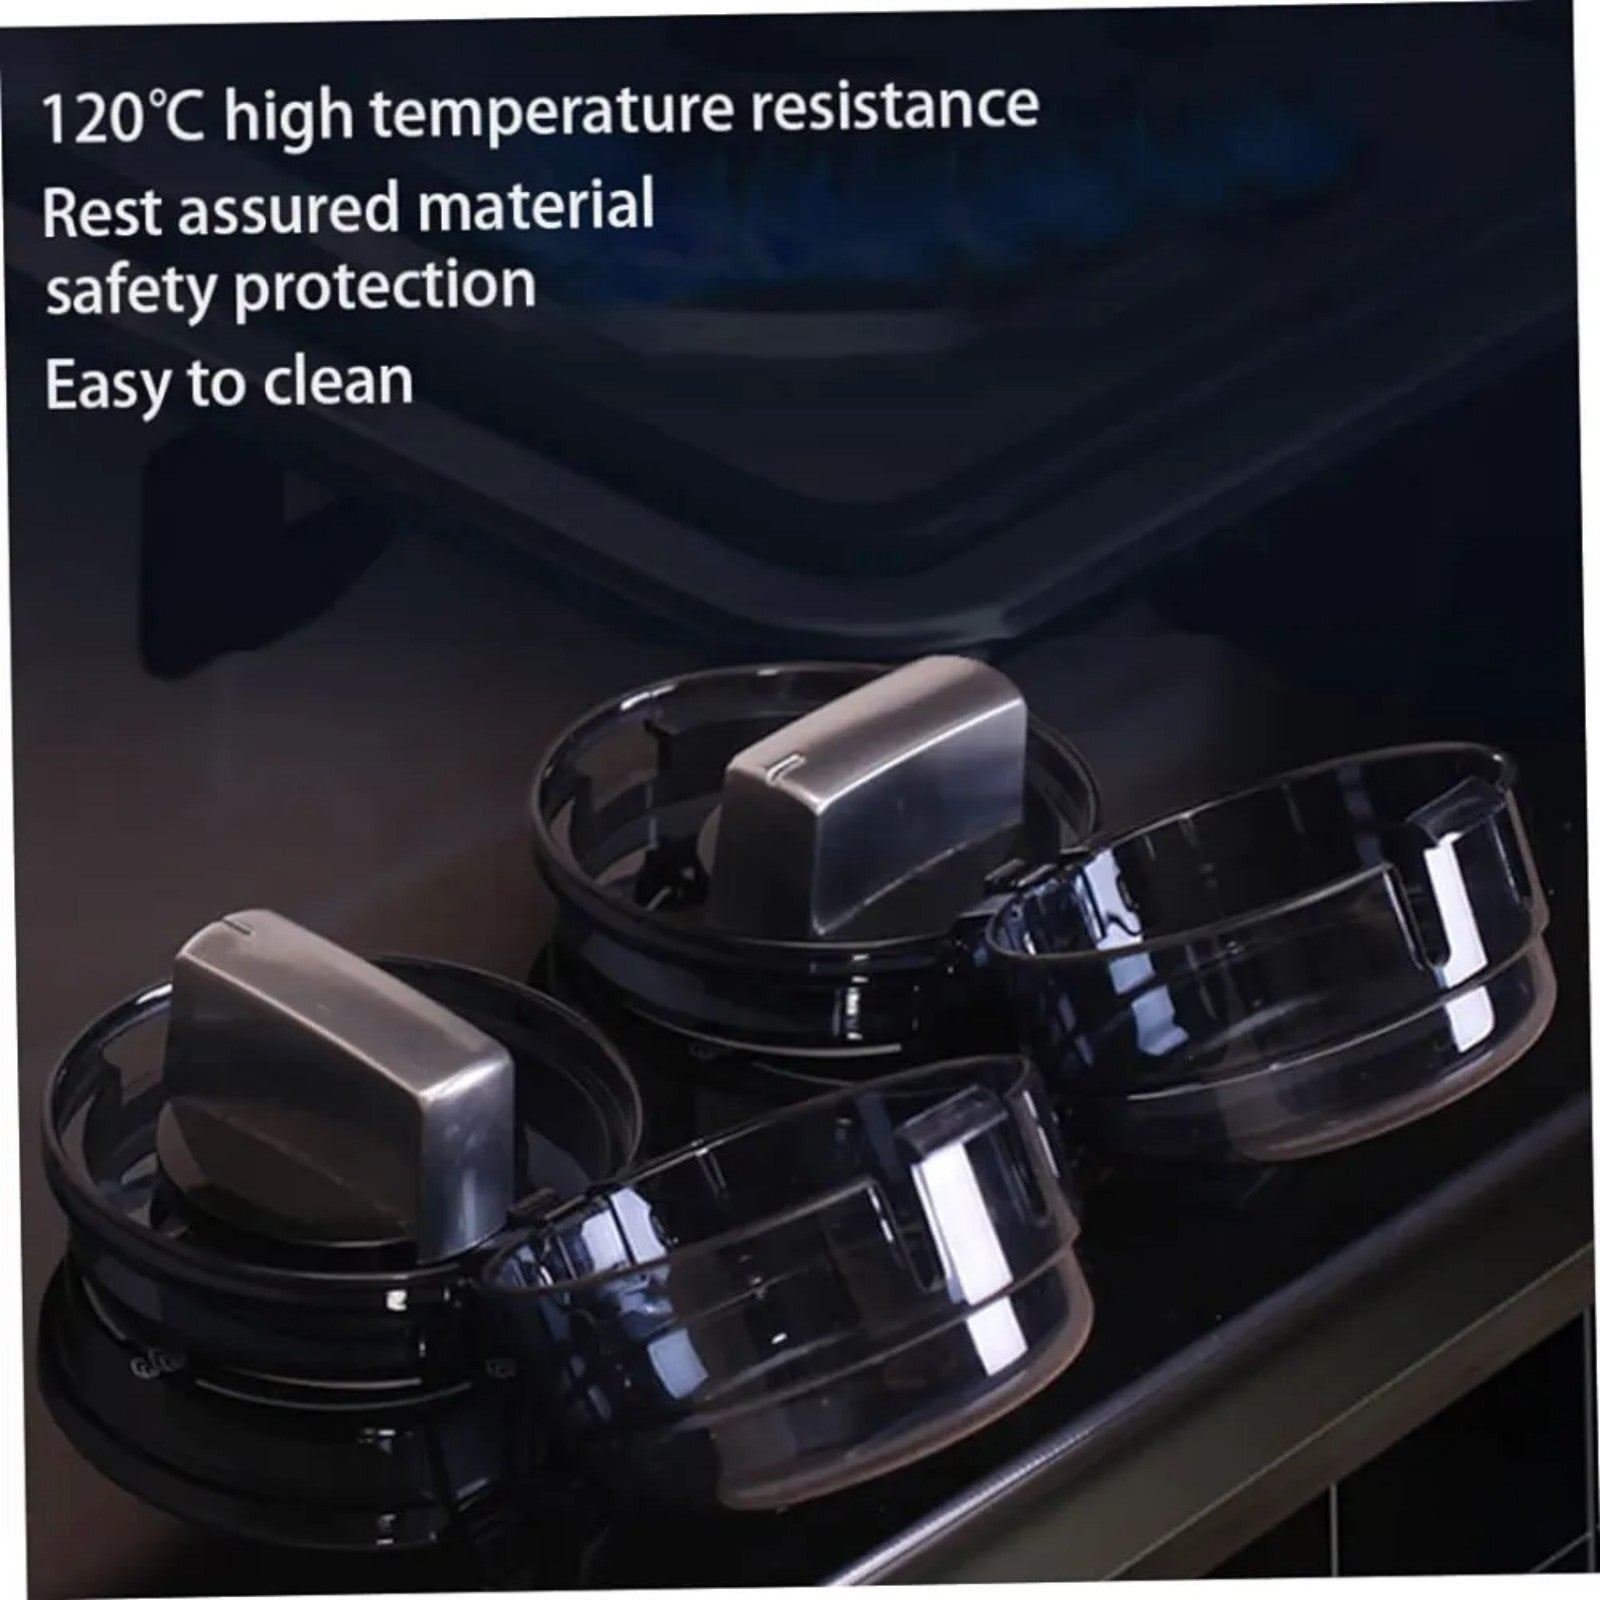 Gas Safety Covers Stove Oven Knob Protector Cover By8Fu